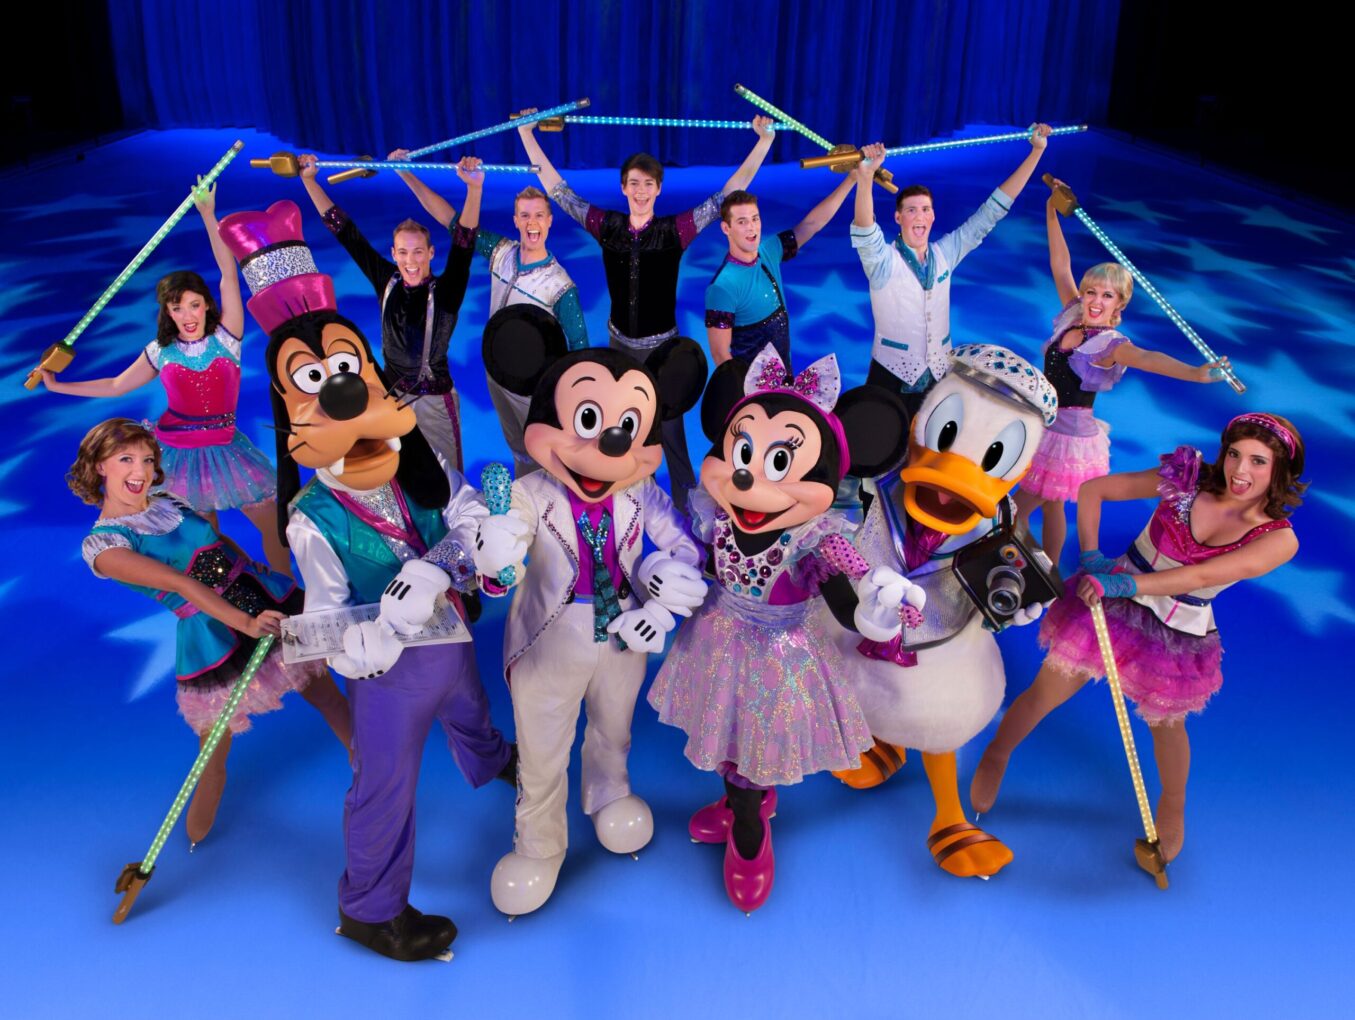 Disney on Ice Returns to the CURE Insurance Arena